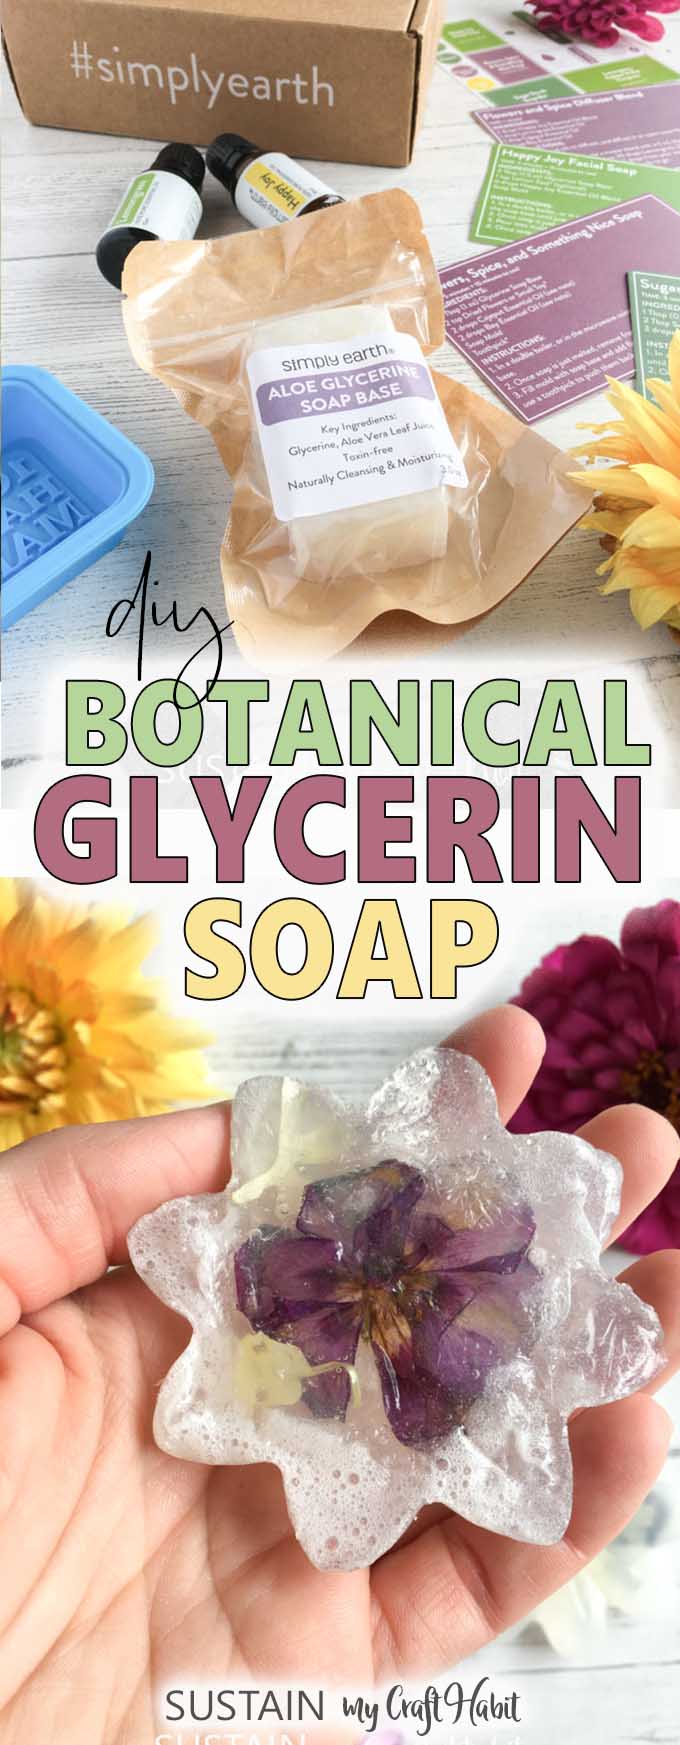 Collage of images including ingredients to make your own glycerin soap with essential oils and a completed soap with embedded flowers.